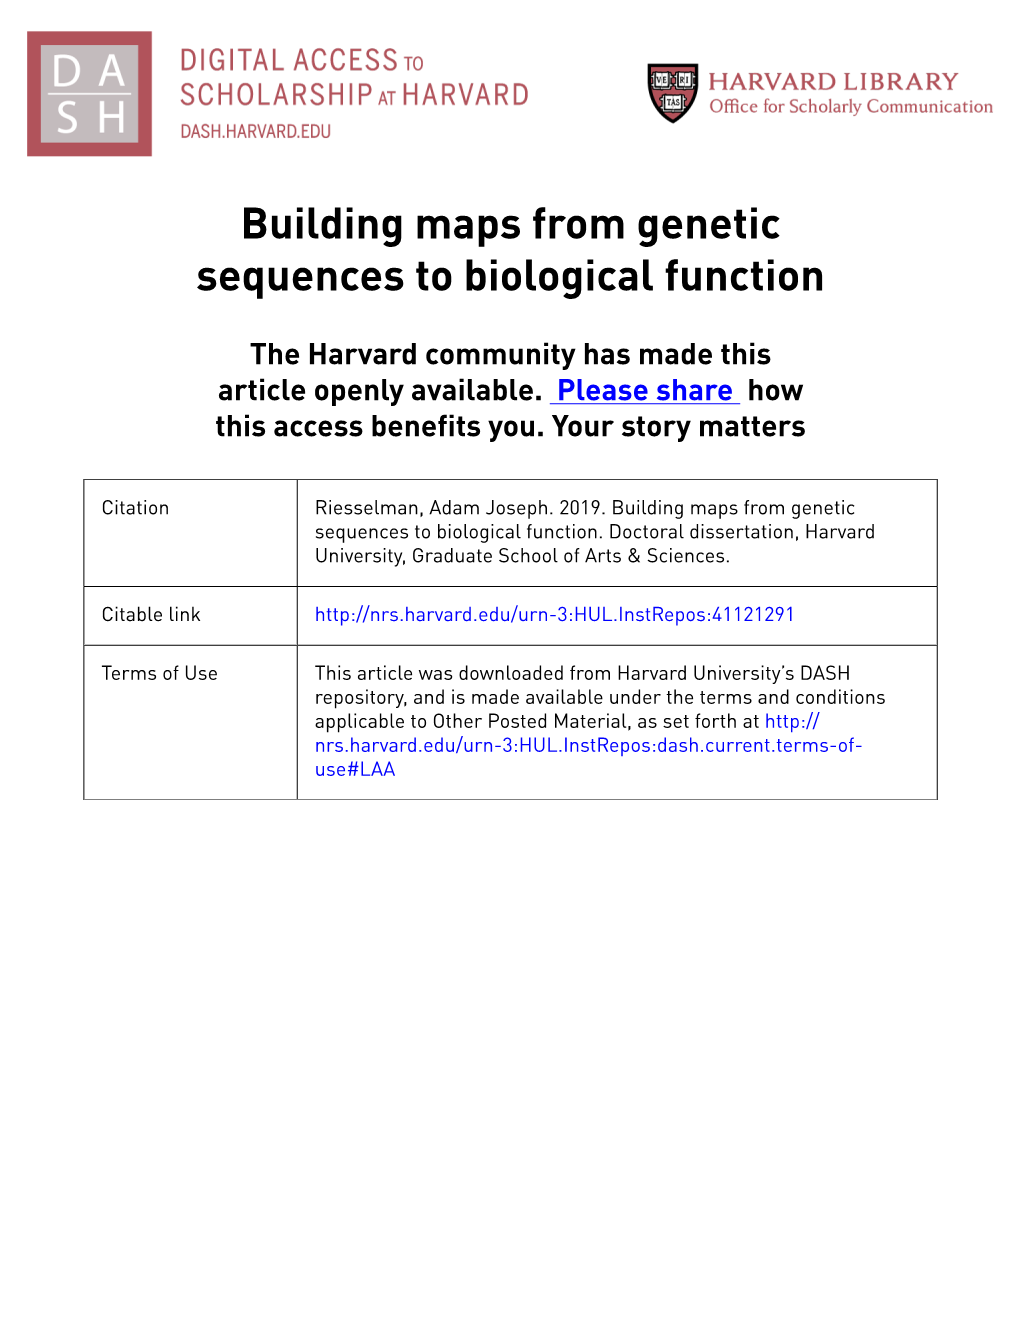 Building Maps from Genetic Sequences to Biological Function